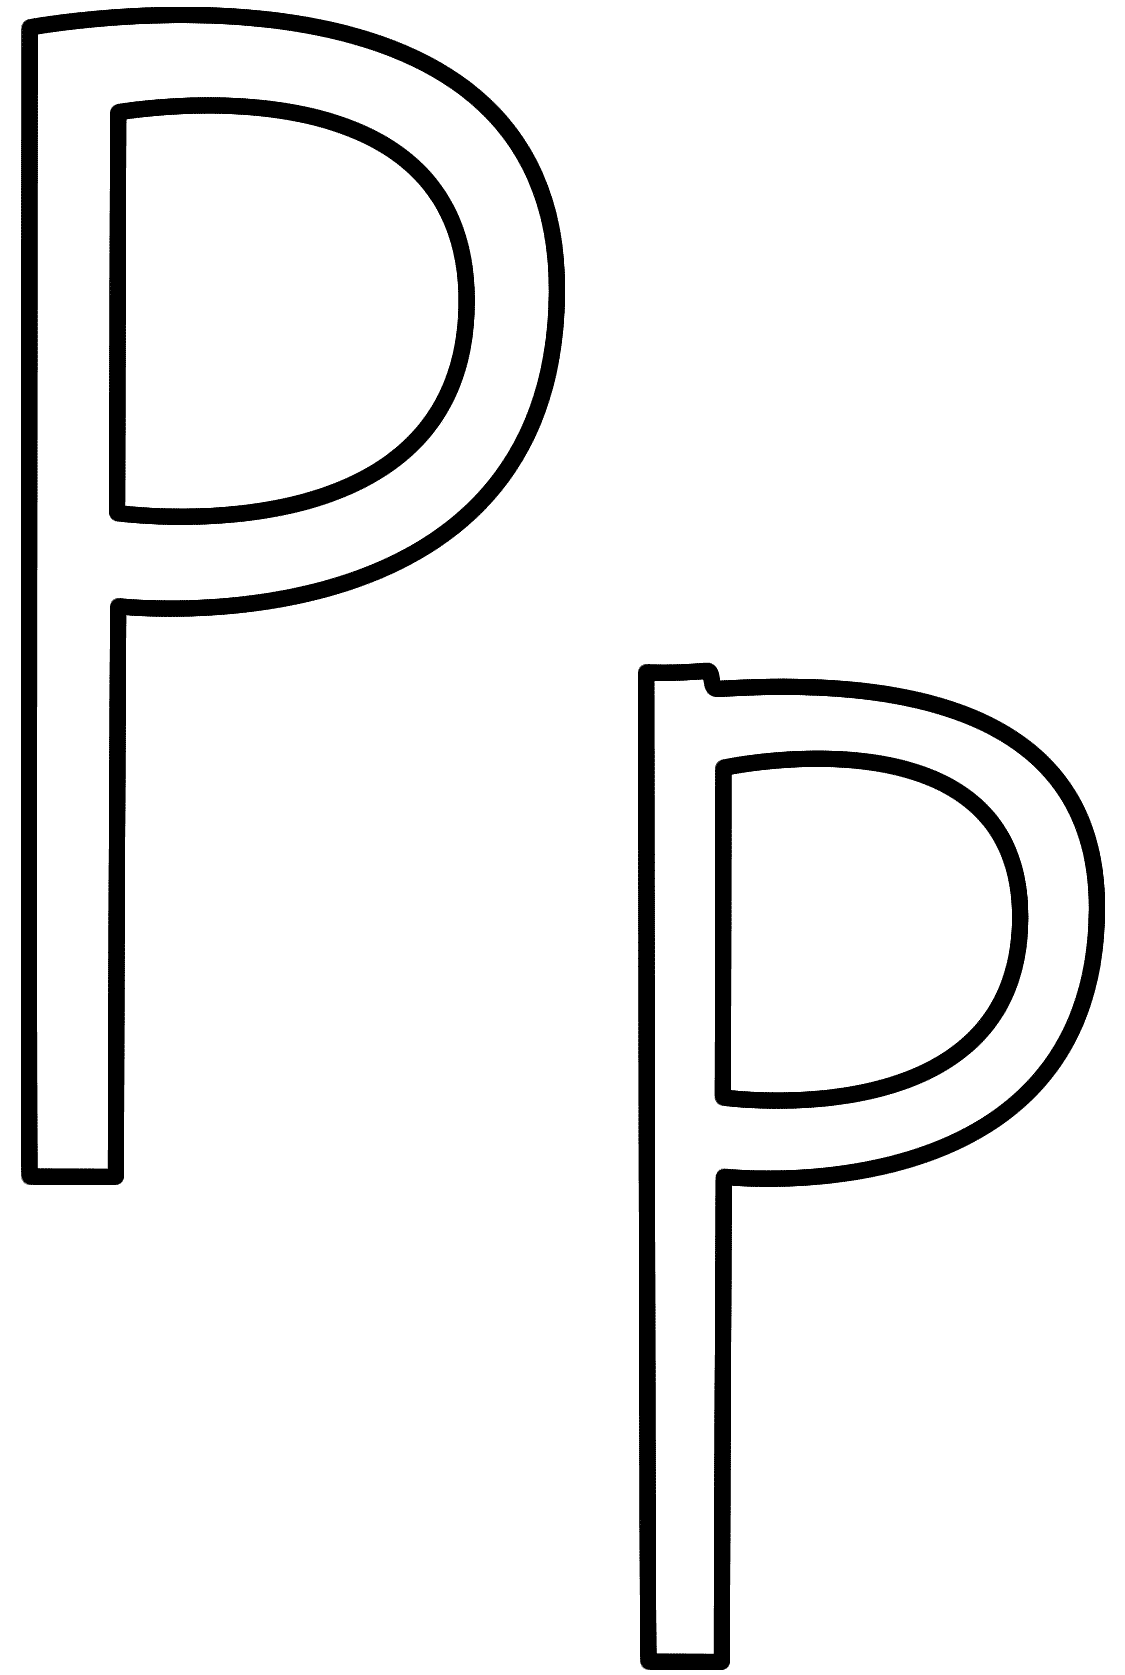 Printable Letter P Coloring Pages